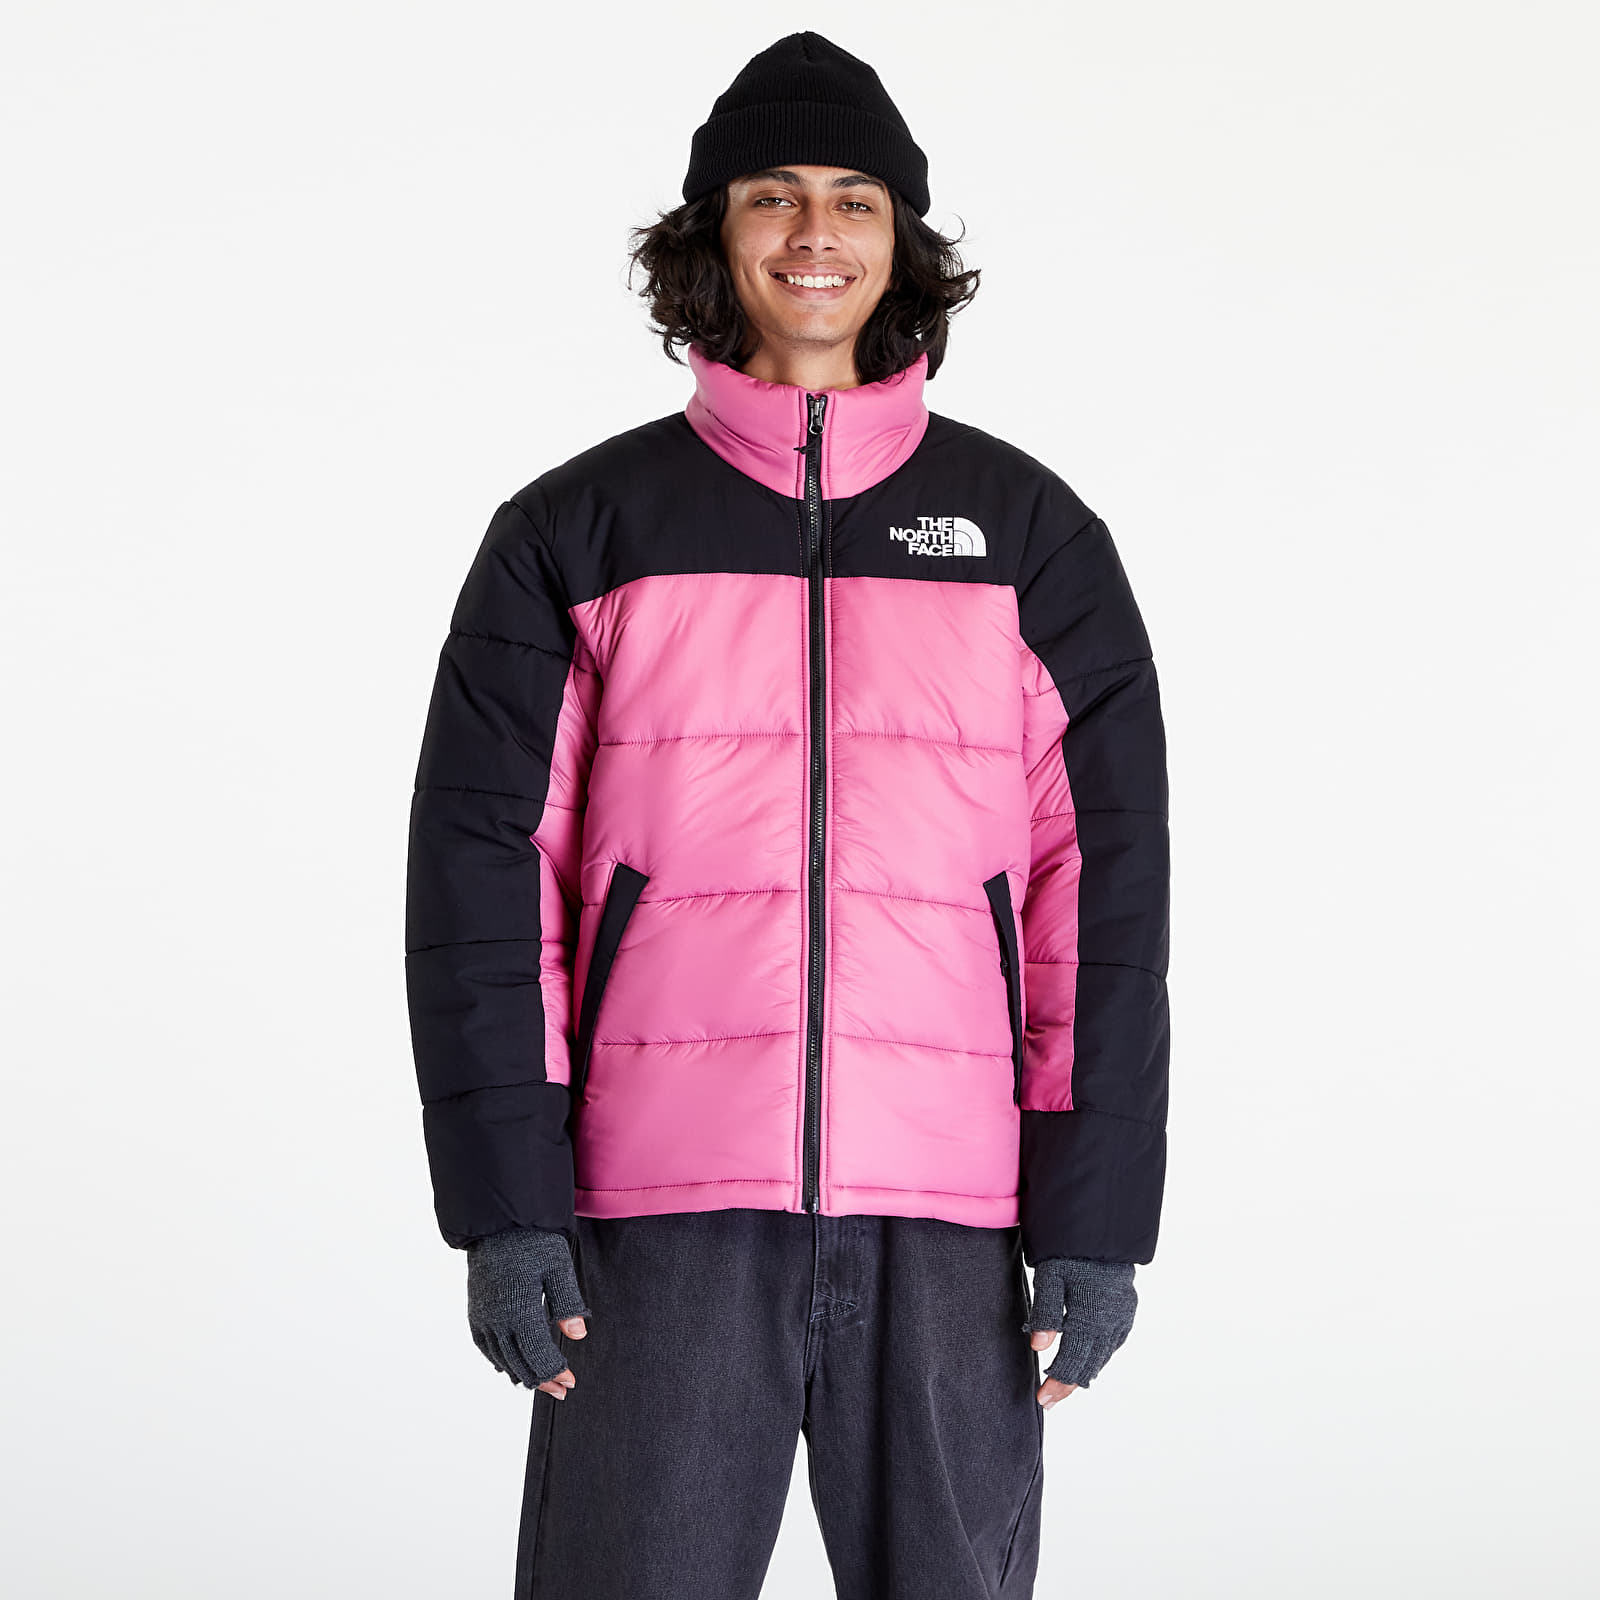 The North Face Hmlyn Insulated Jacket